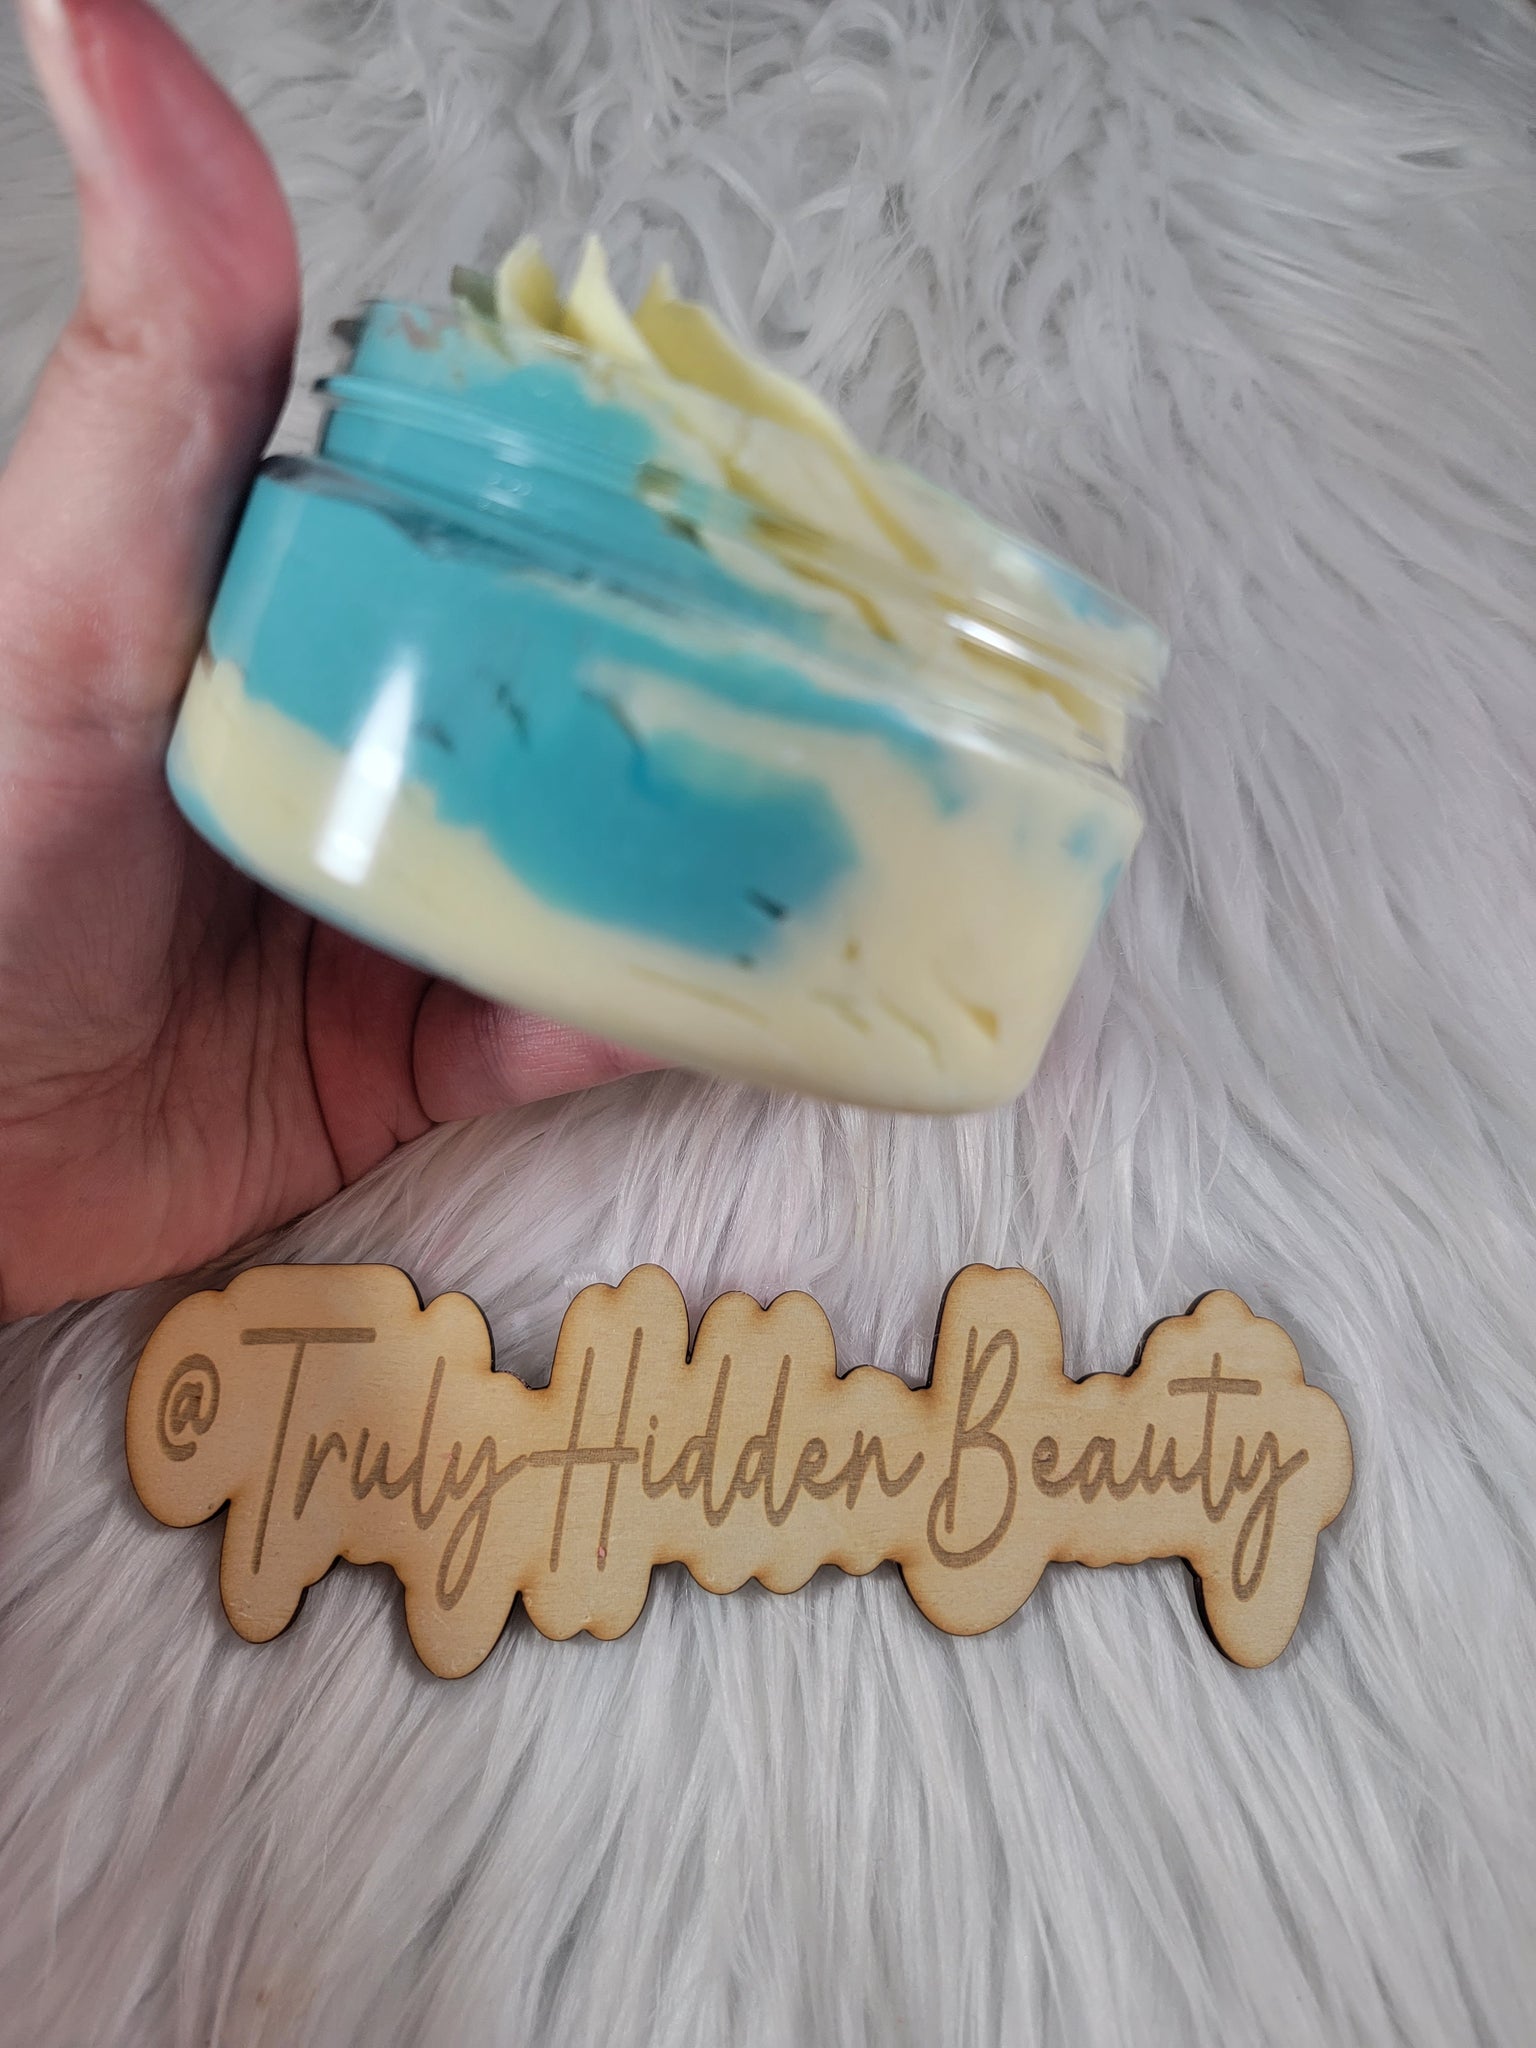 Blueberry cheesecake Whipped Body Butter